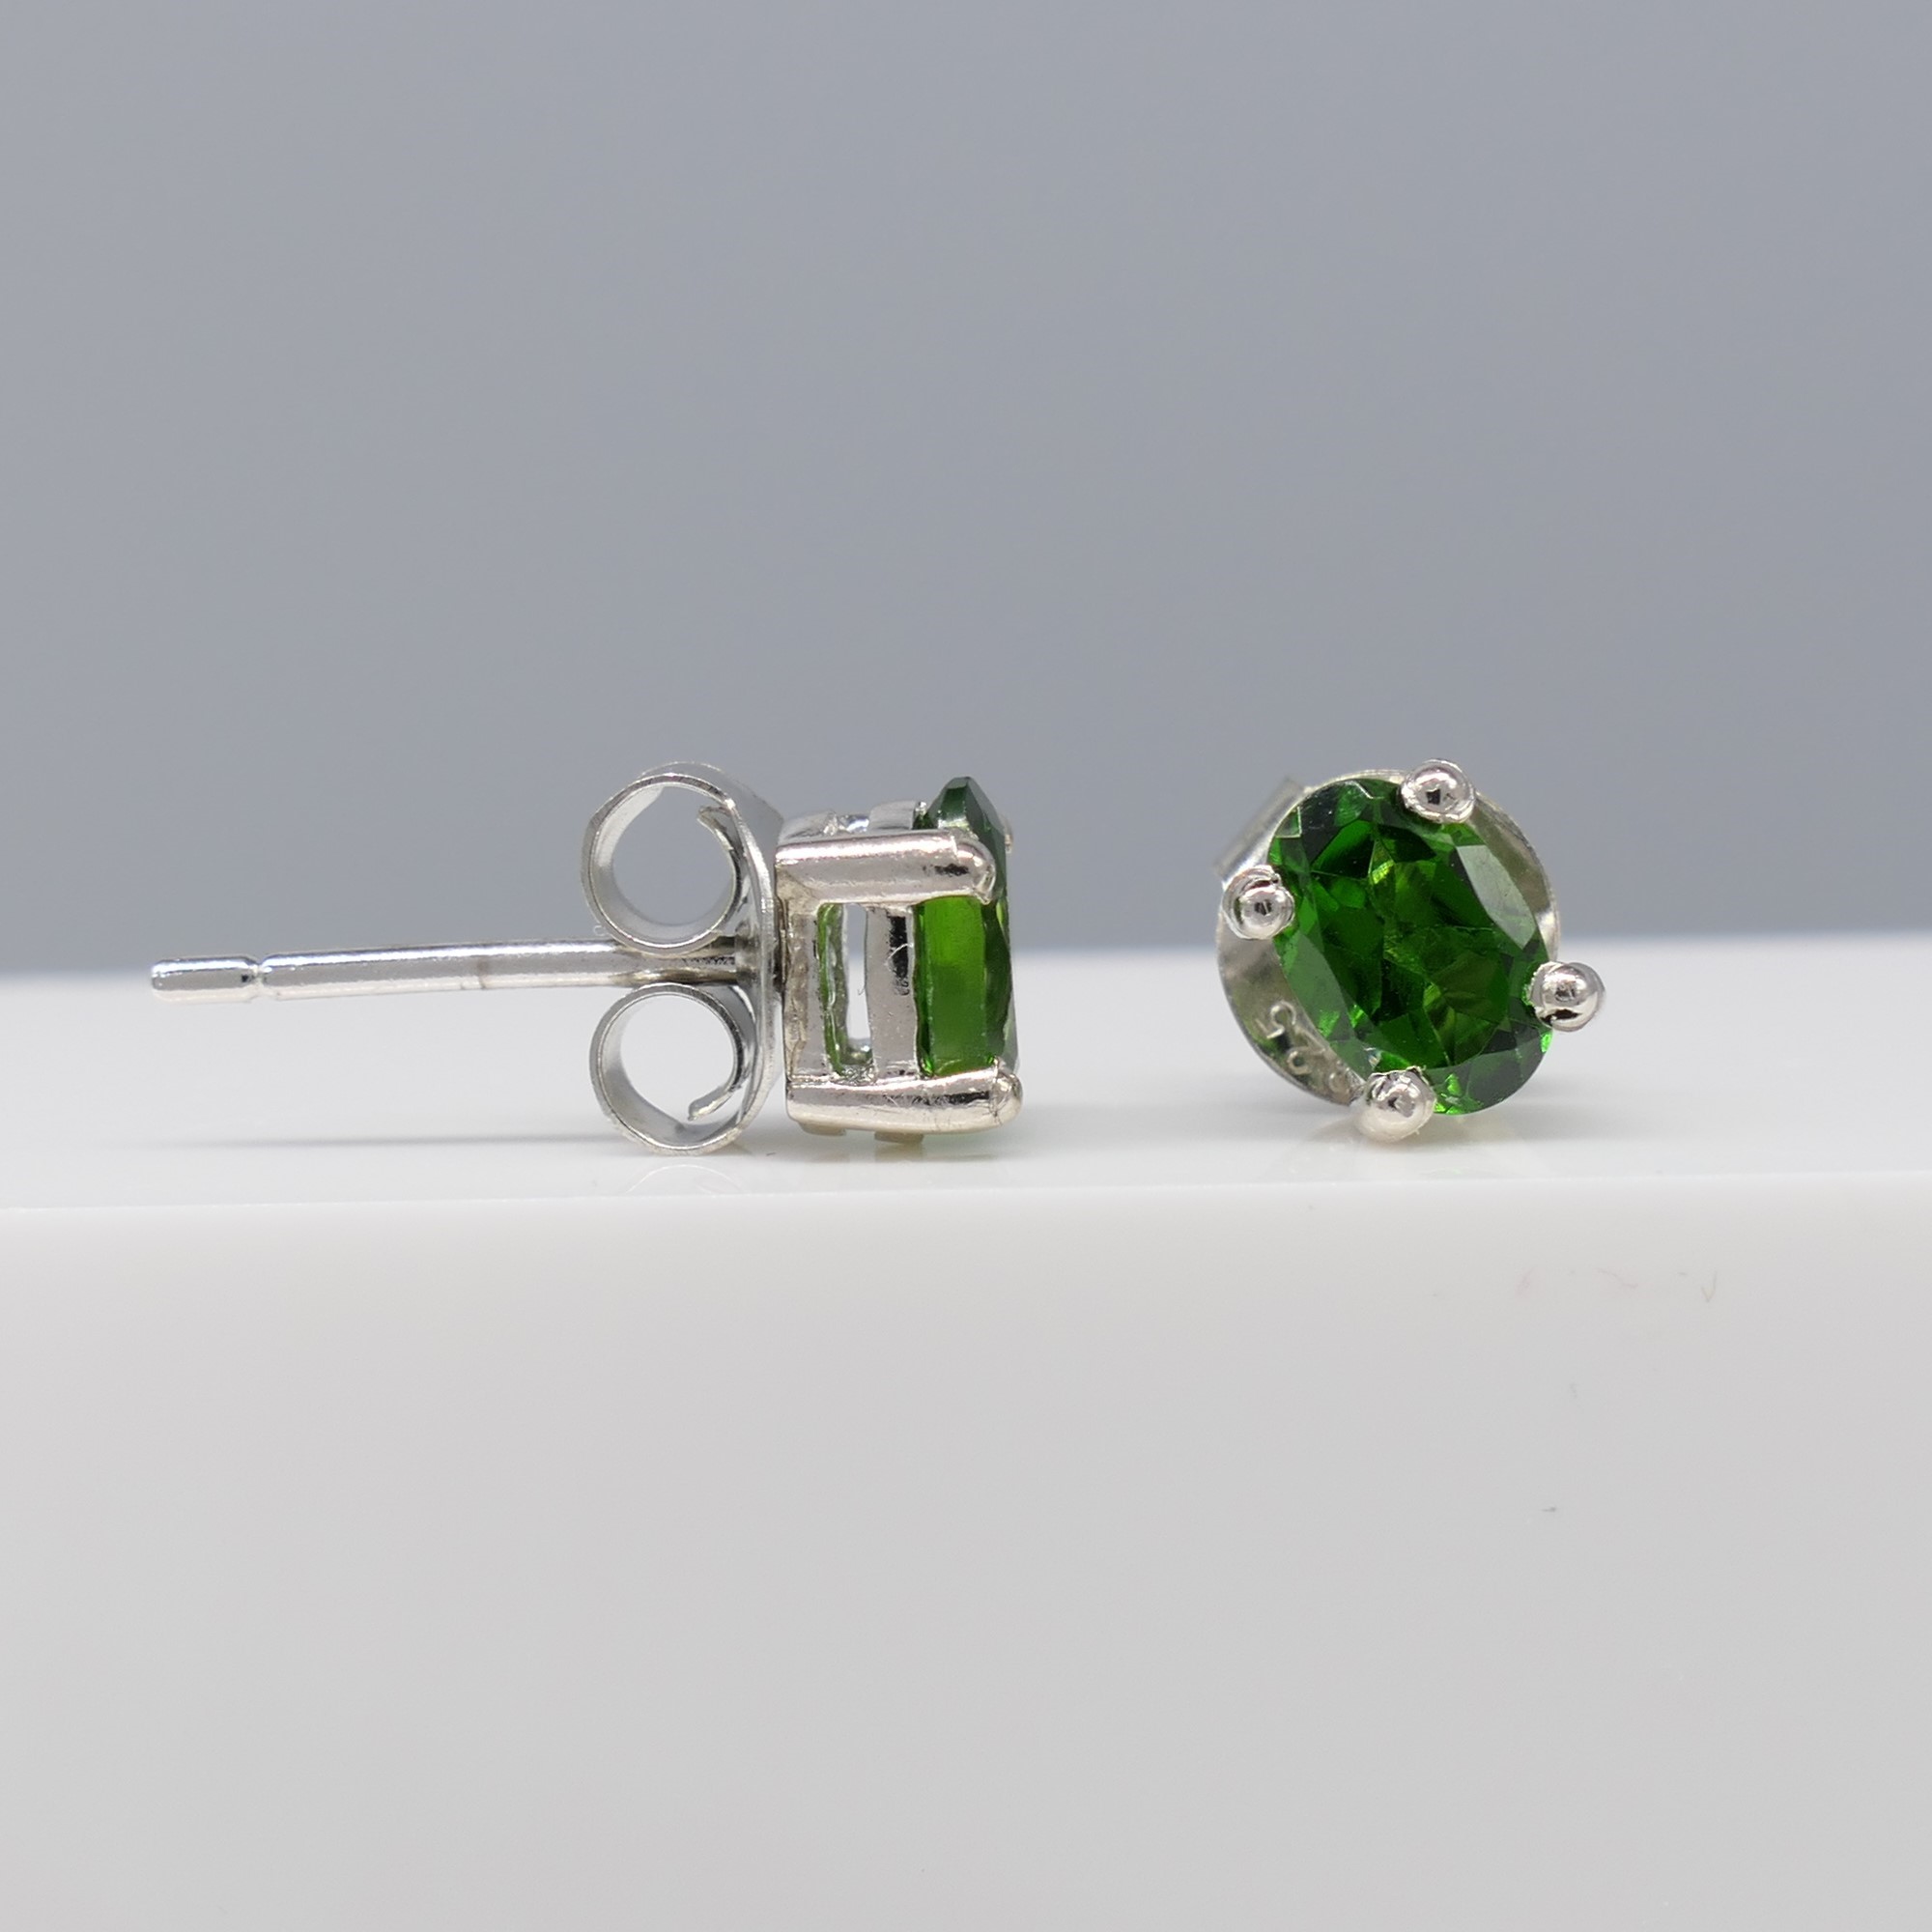 Pair of Natural Chrome Diopside Ear Studs In Sterling Silver - Image 4 of 6